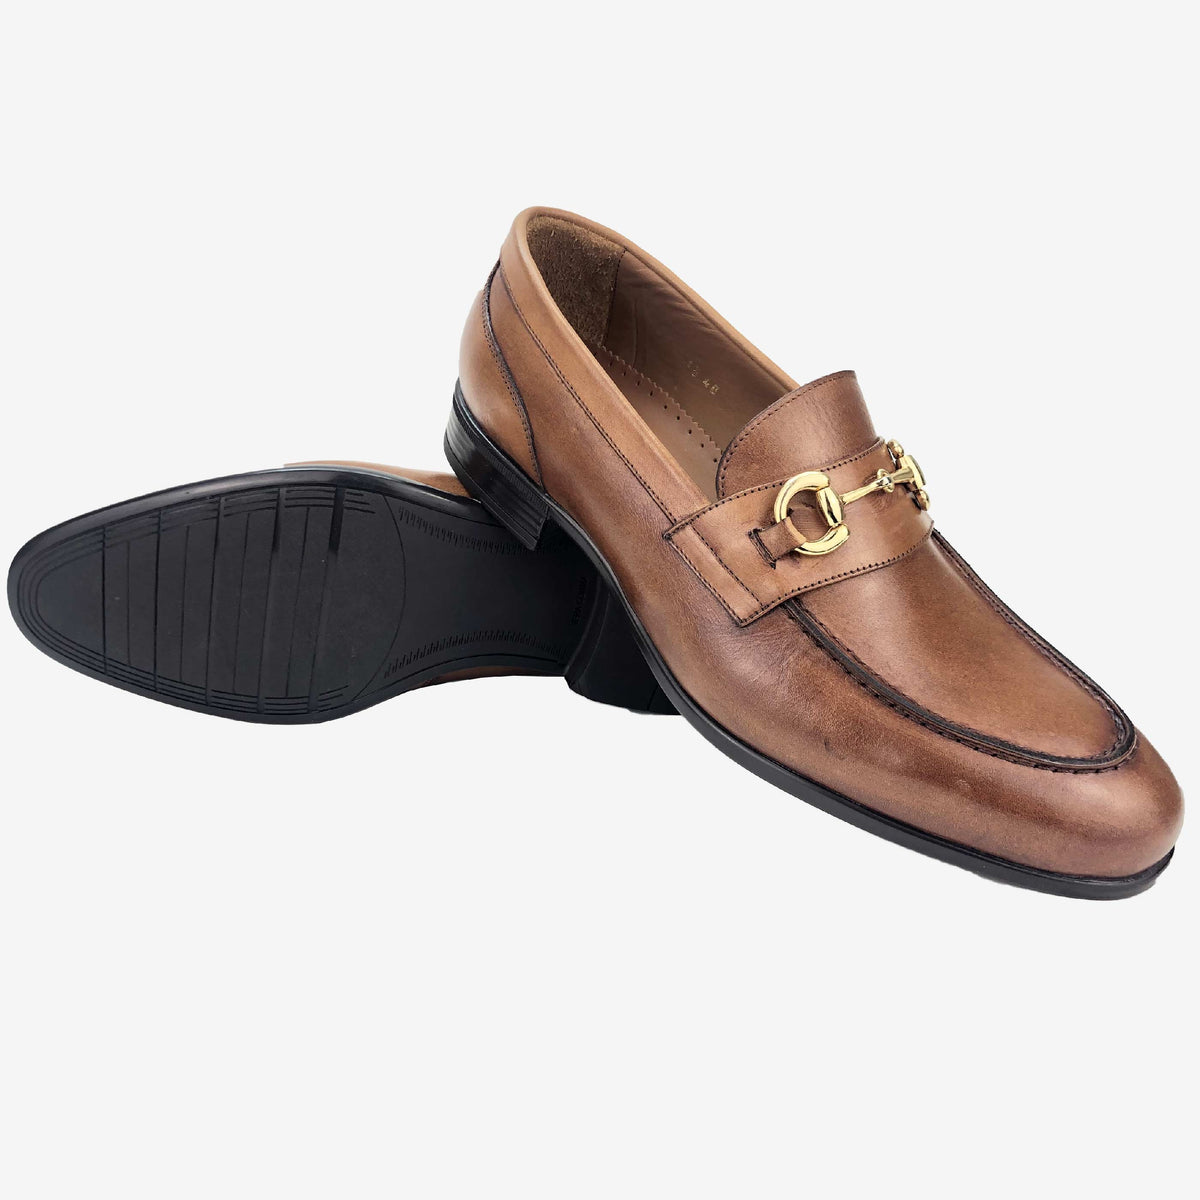 CH015-019  - Chaussure Cuir taba - deluxe-maroc